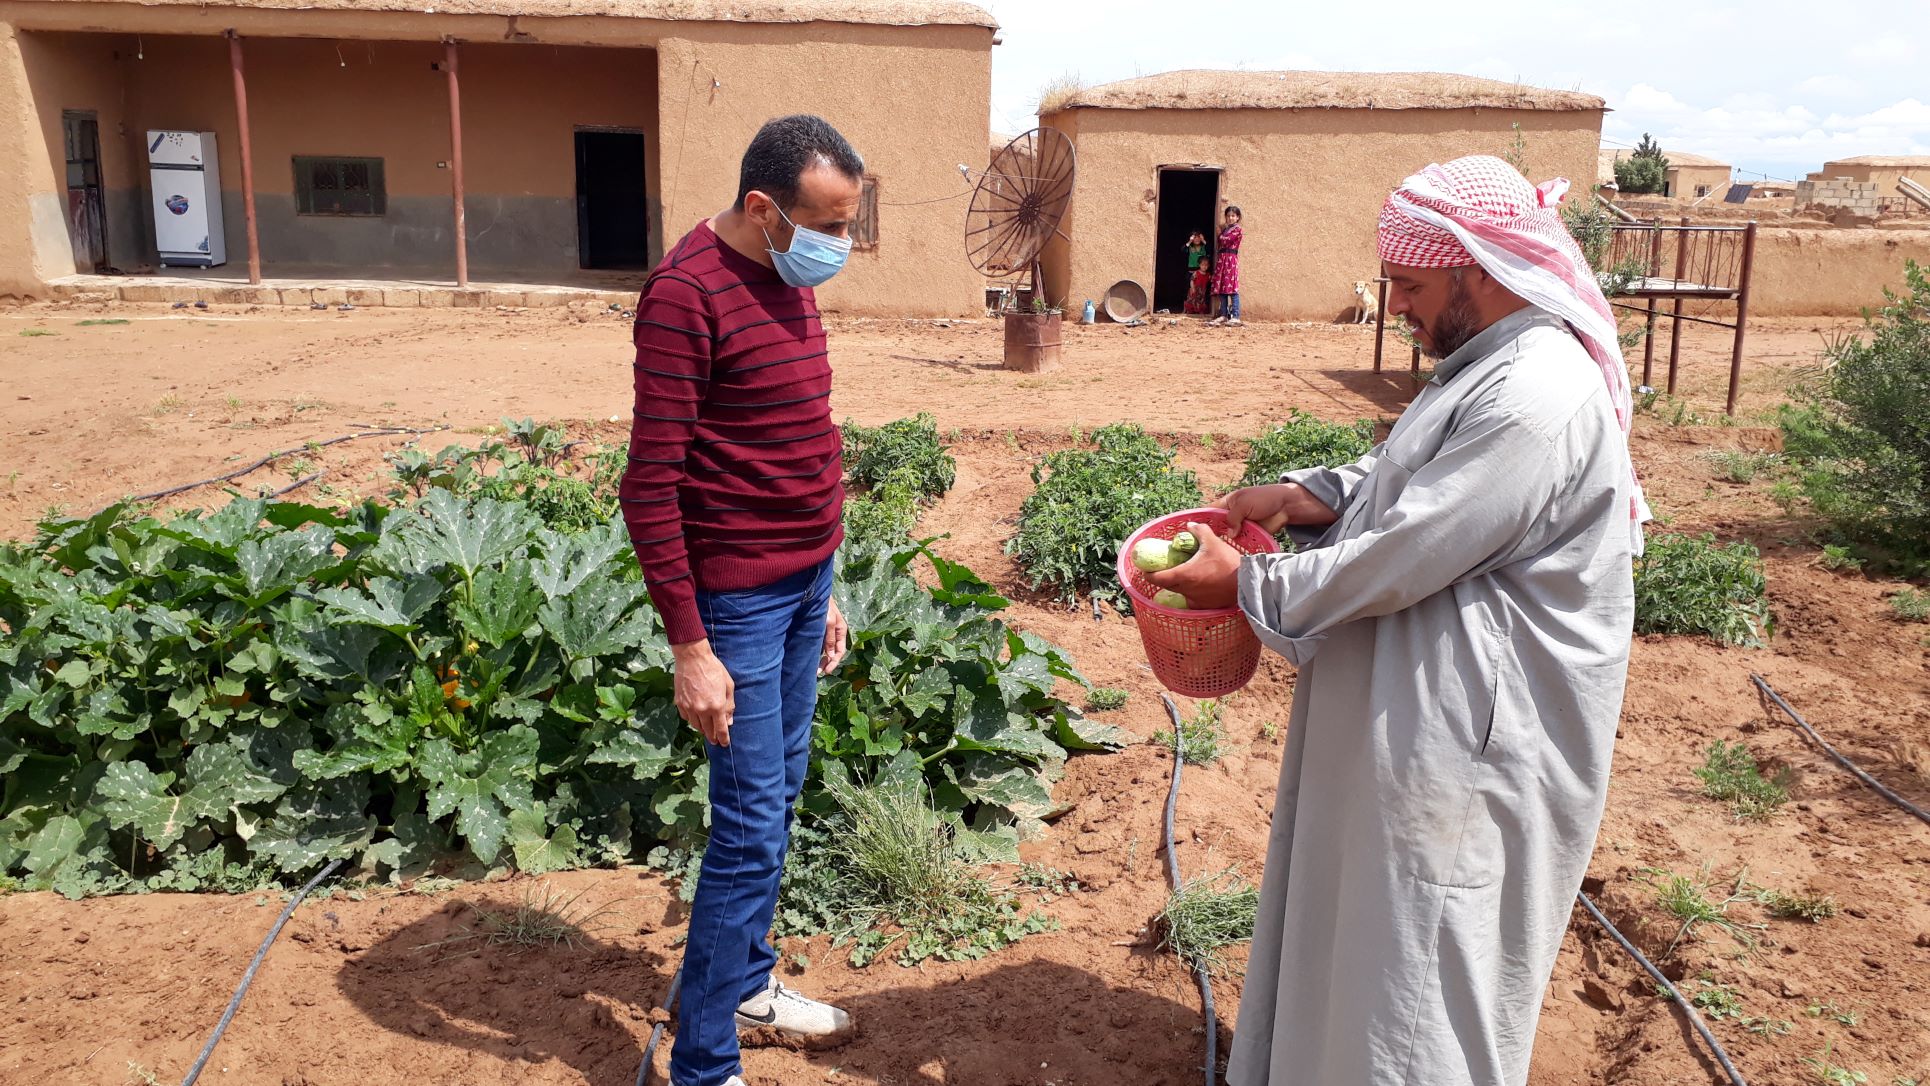 Climate-smart Agriculture Promotes Stability and Livelihoods in Northeast Syria